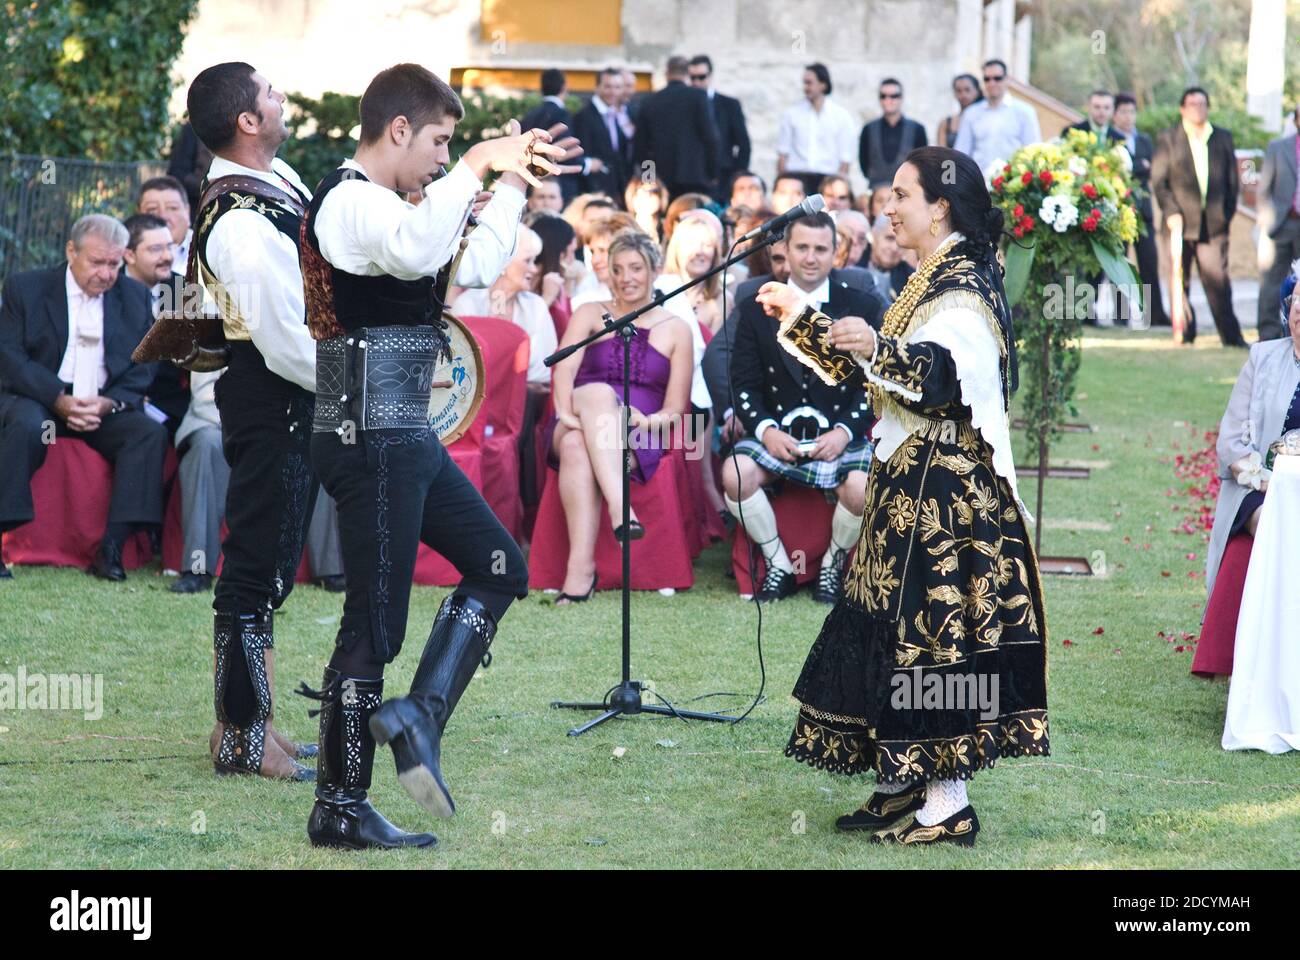 Salamanca Folklorist El Mariquelo and group perform at an Outdoor Wedding in Spain Stock Photo